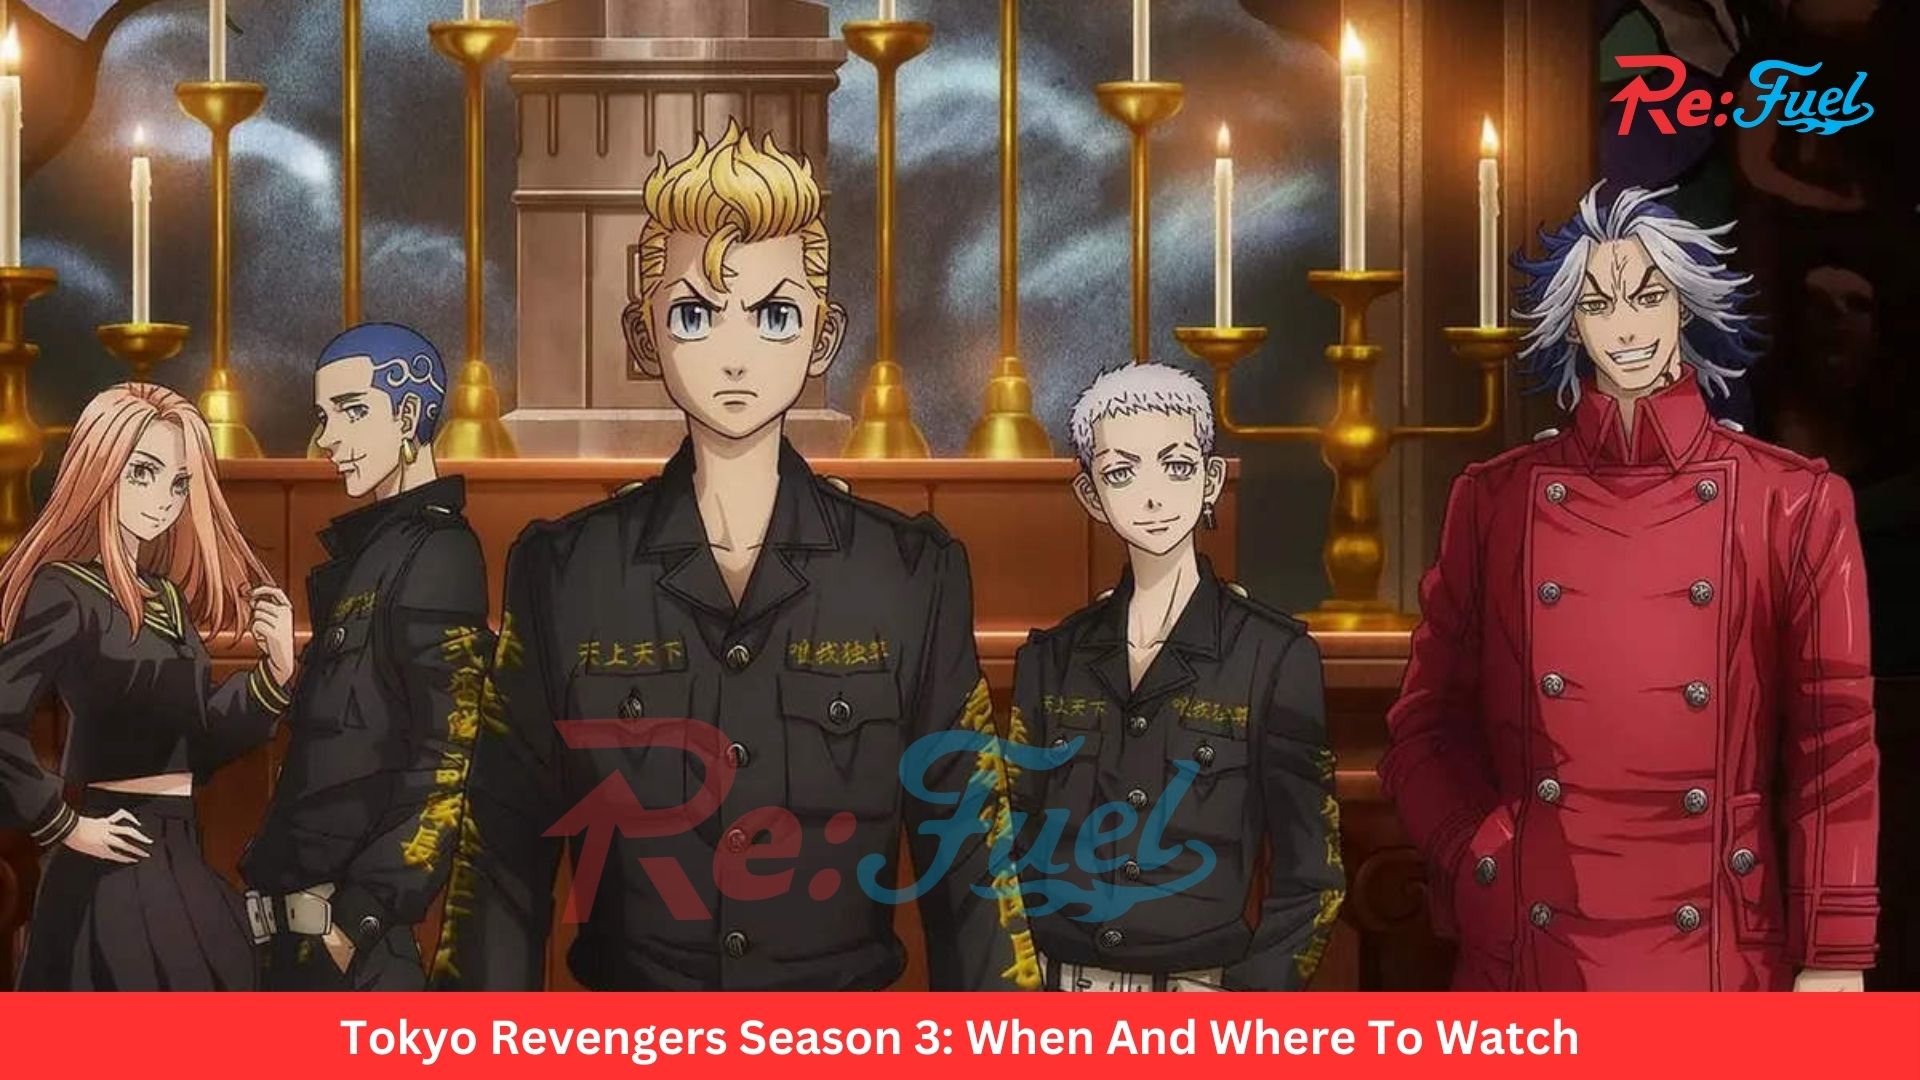 Tokyo Revengers Season 3: When And Where To Watch